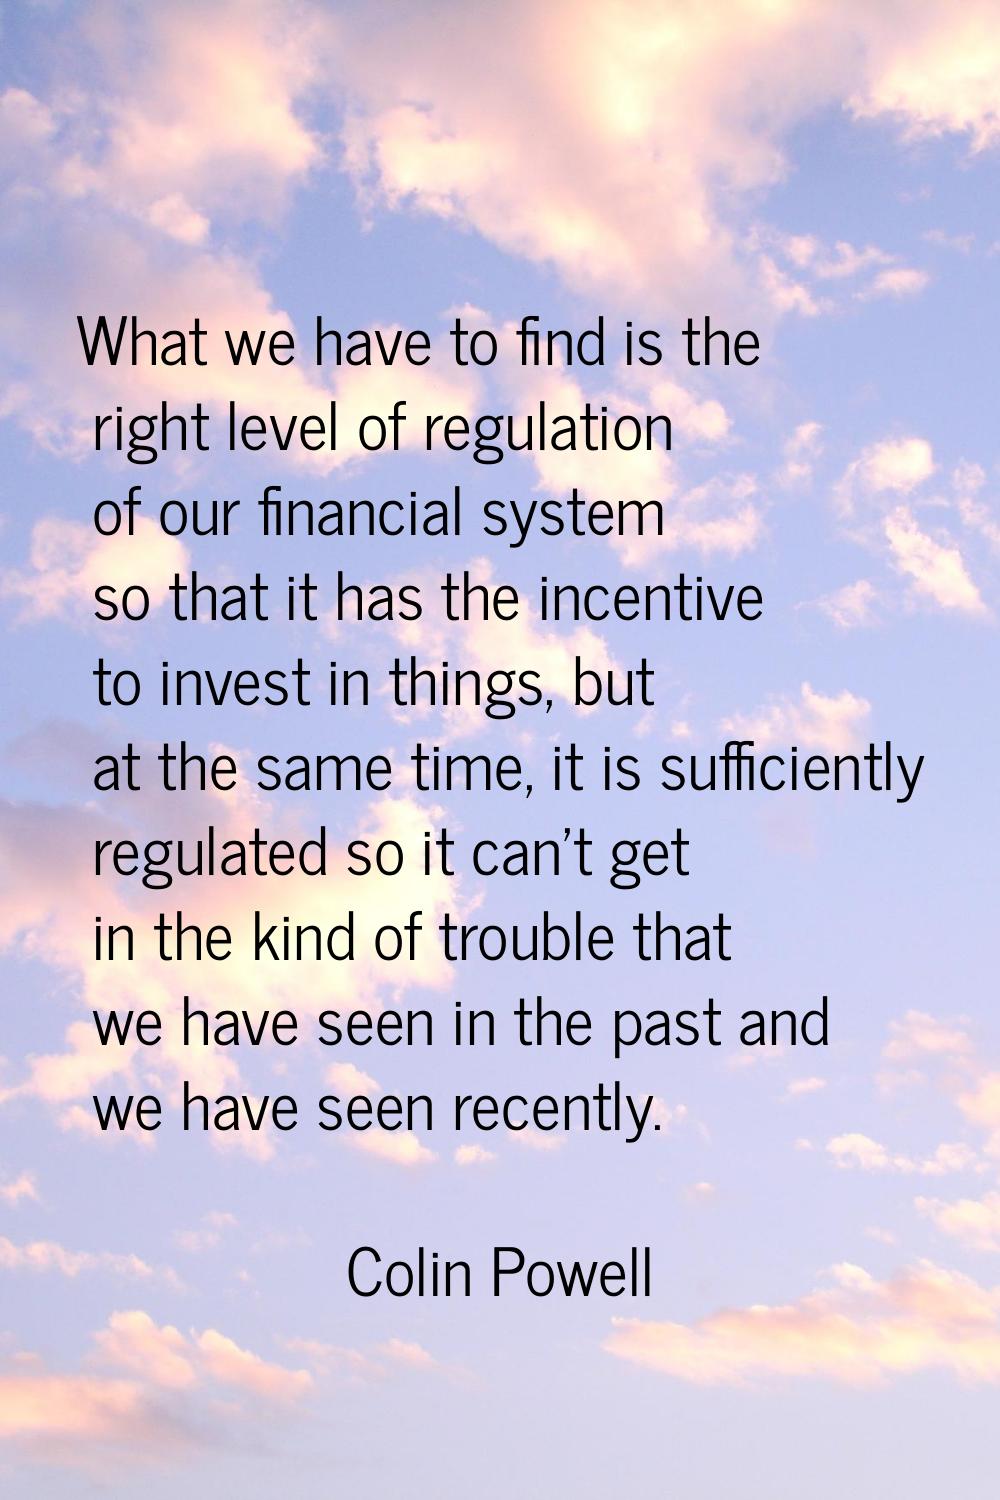 What we have to find is the right level of regulation of our financial system so that it has the in